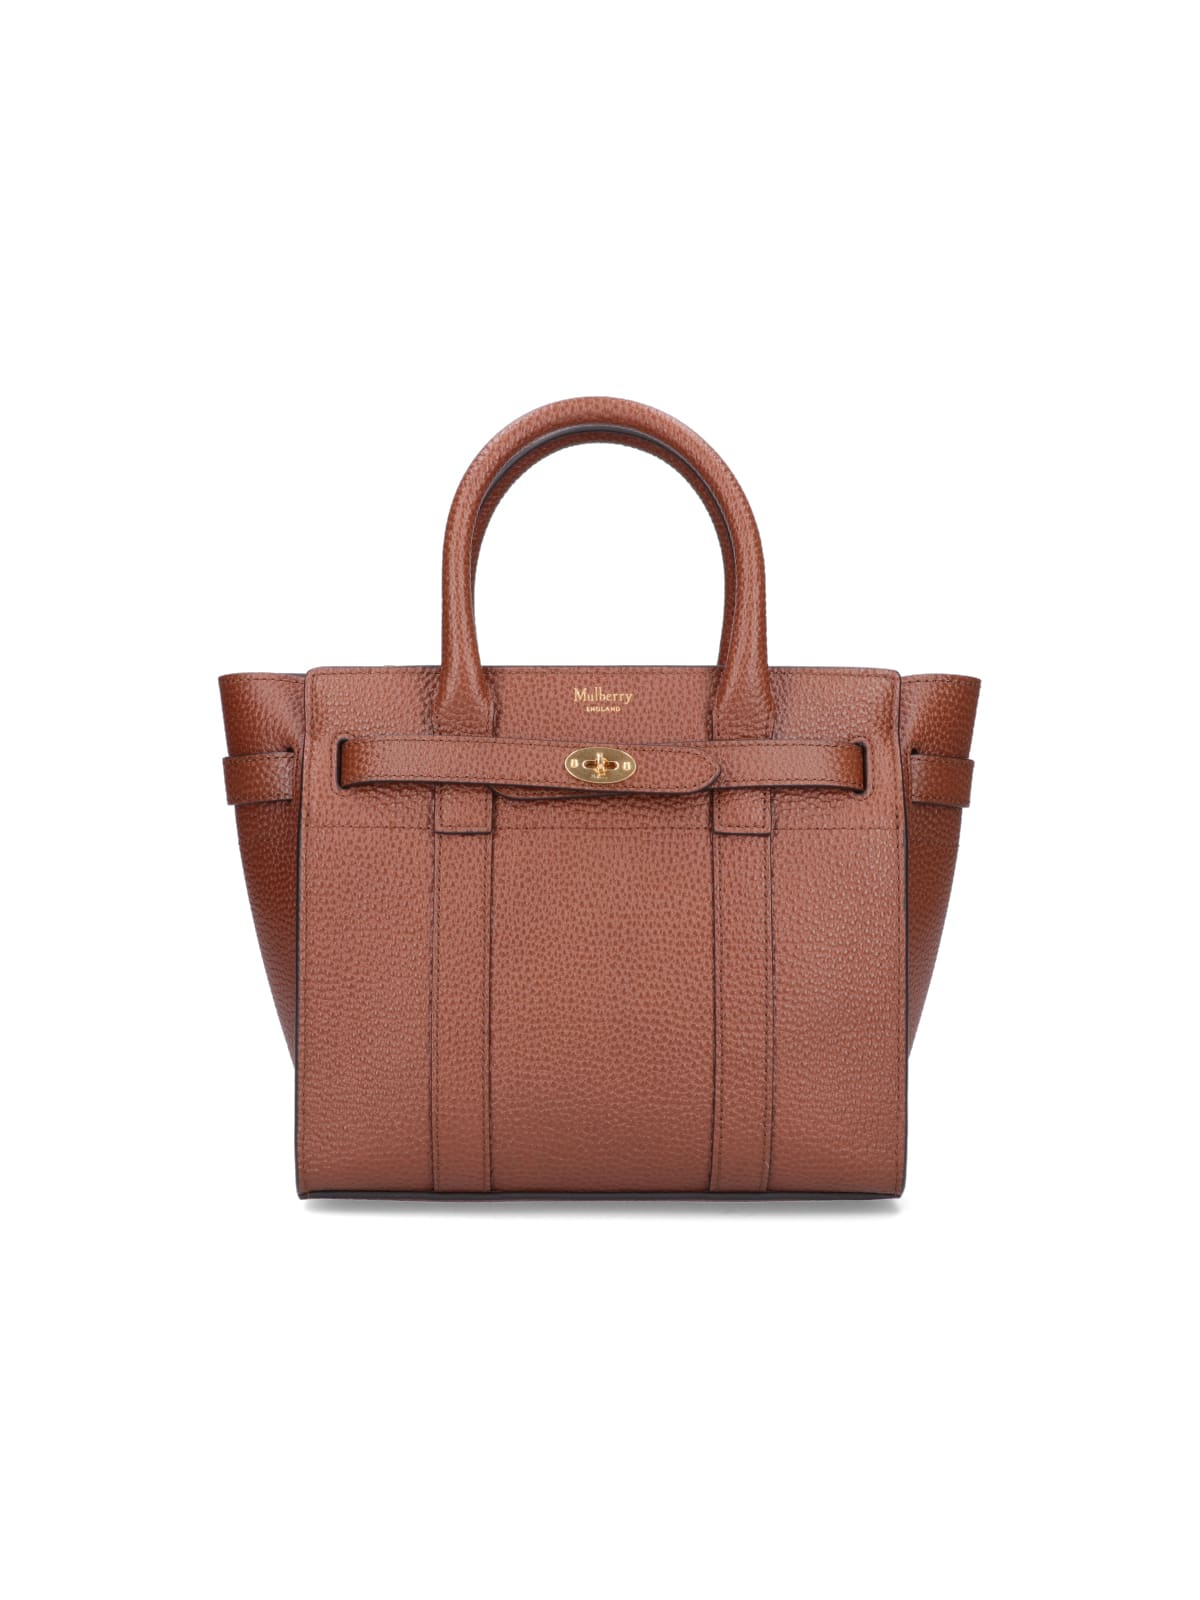 MULBERRY TOTE